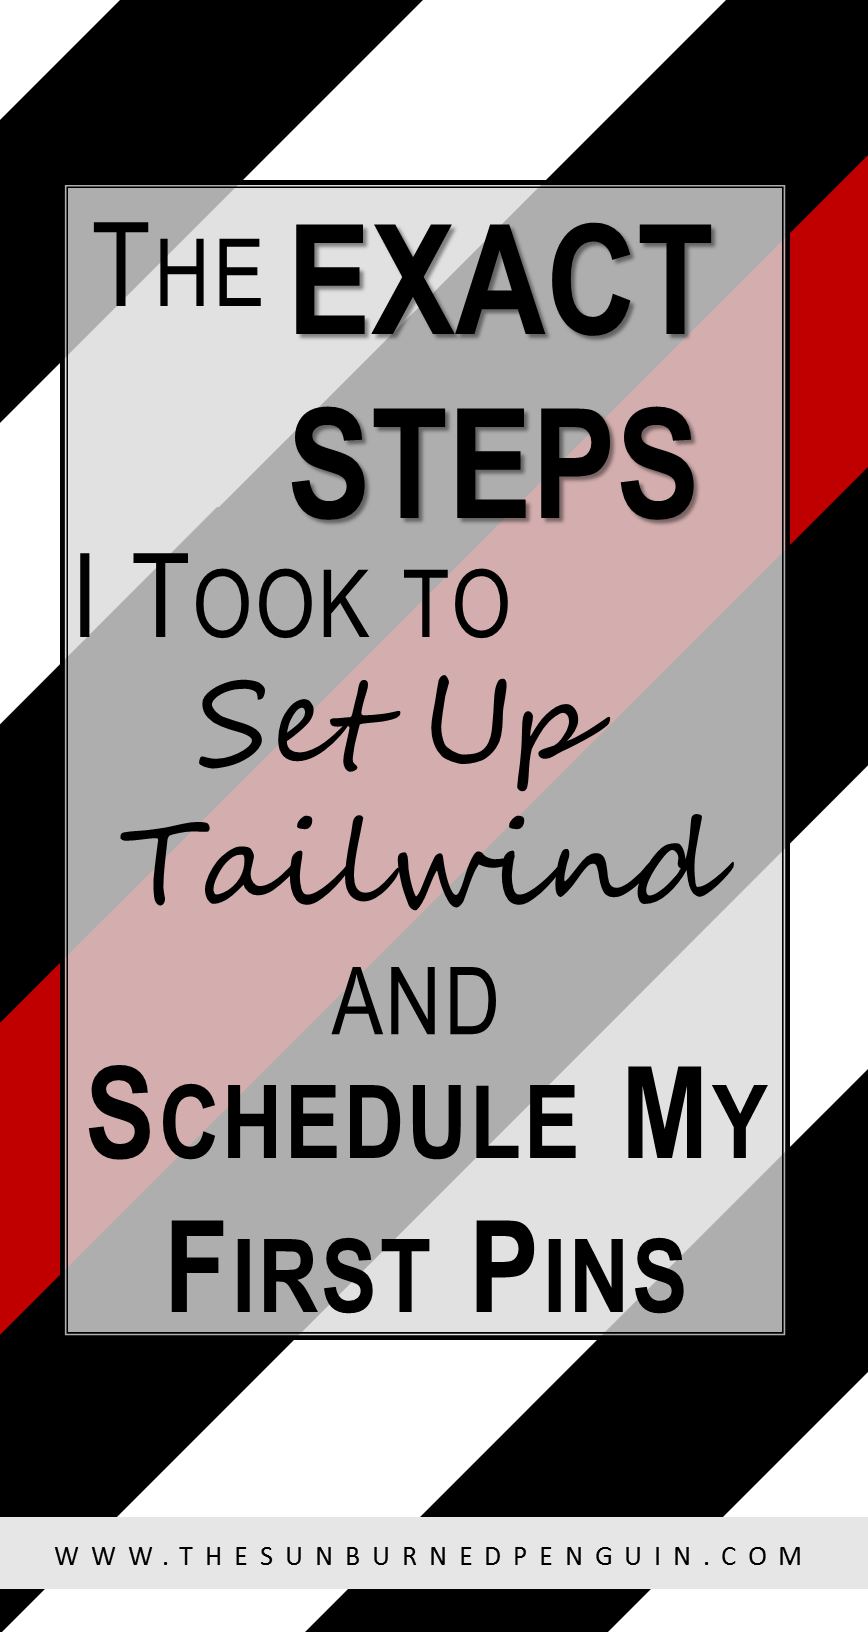 The Exact Steps I Took to Set Up Tailwind and Schedule My First Pins